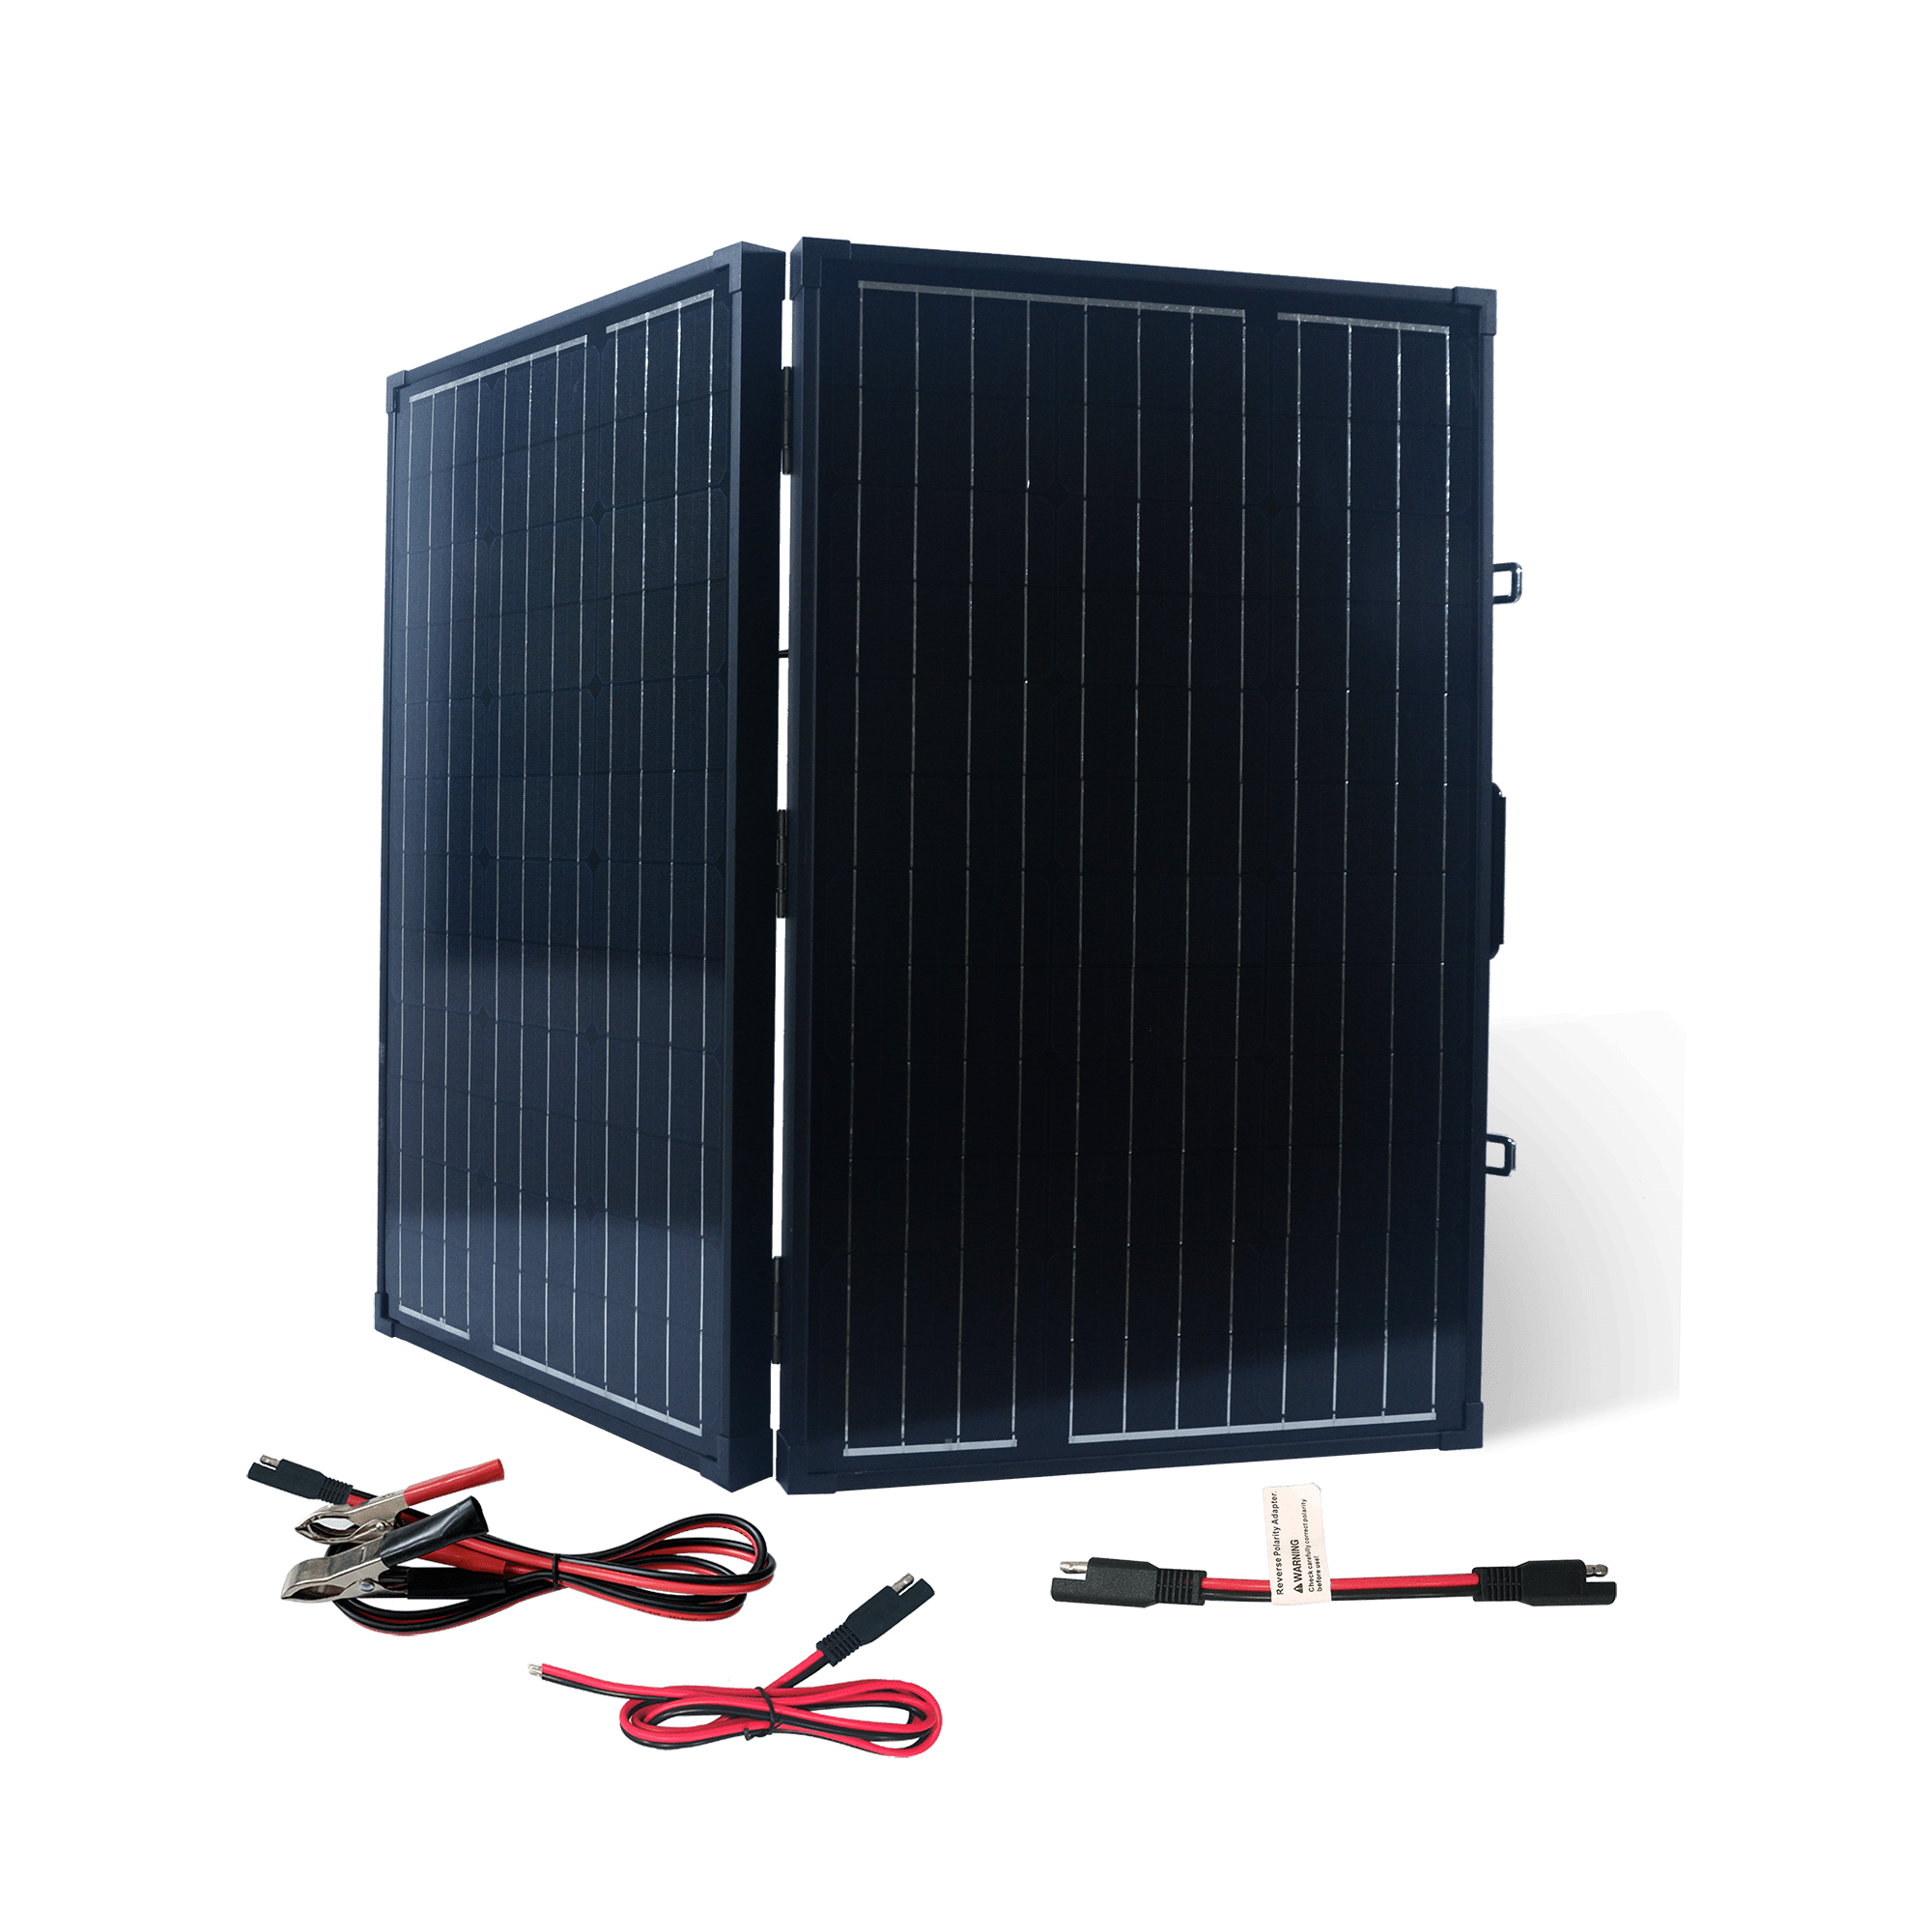 Nature Power 1x 6.67A Charge Controller + 1x 120W Briefcase Foldable Solar Panel Kit